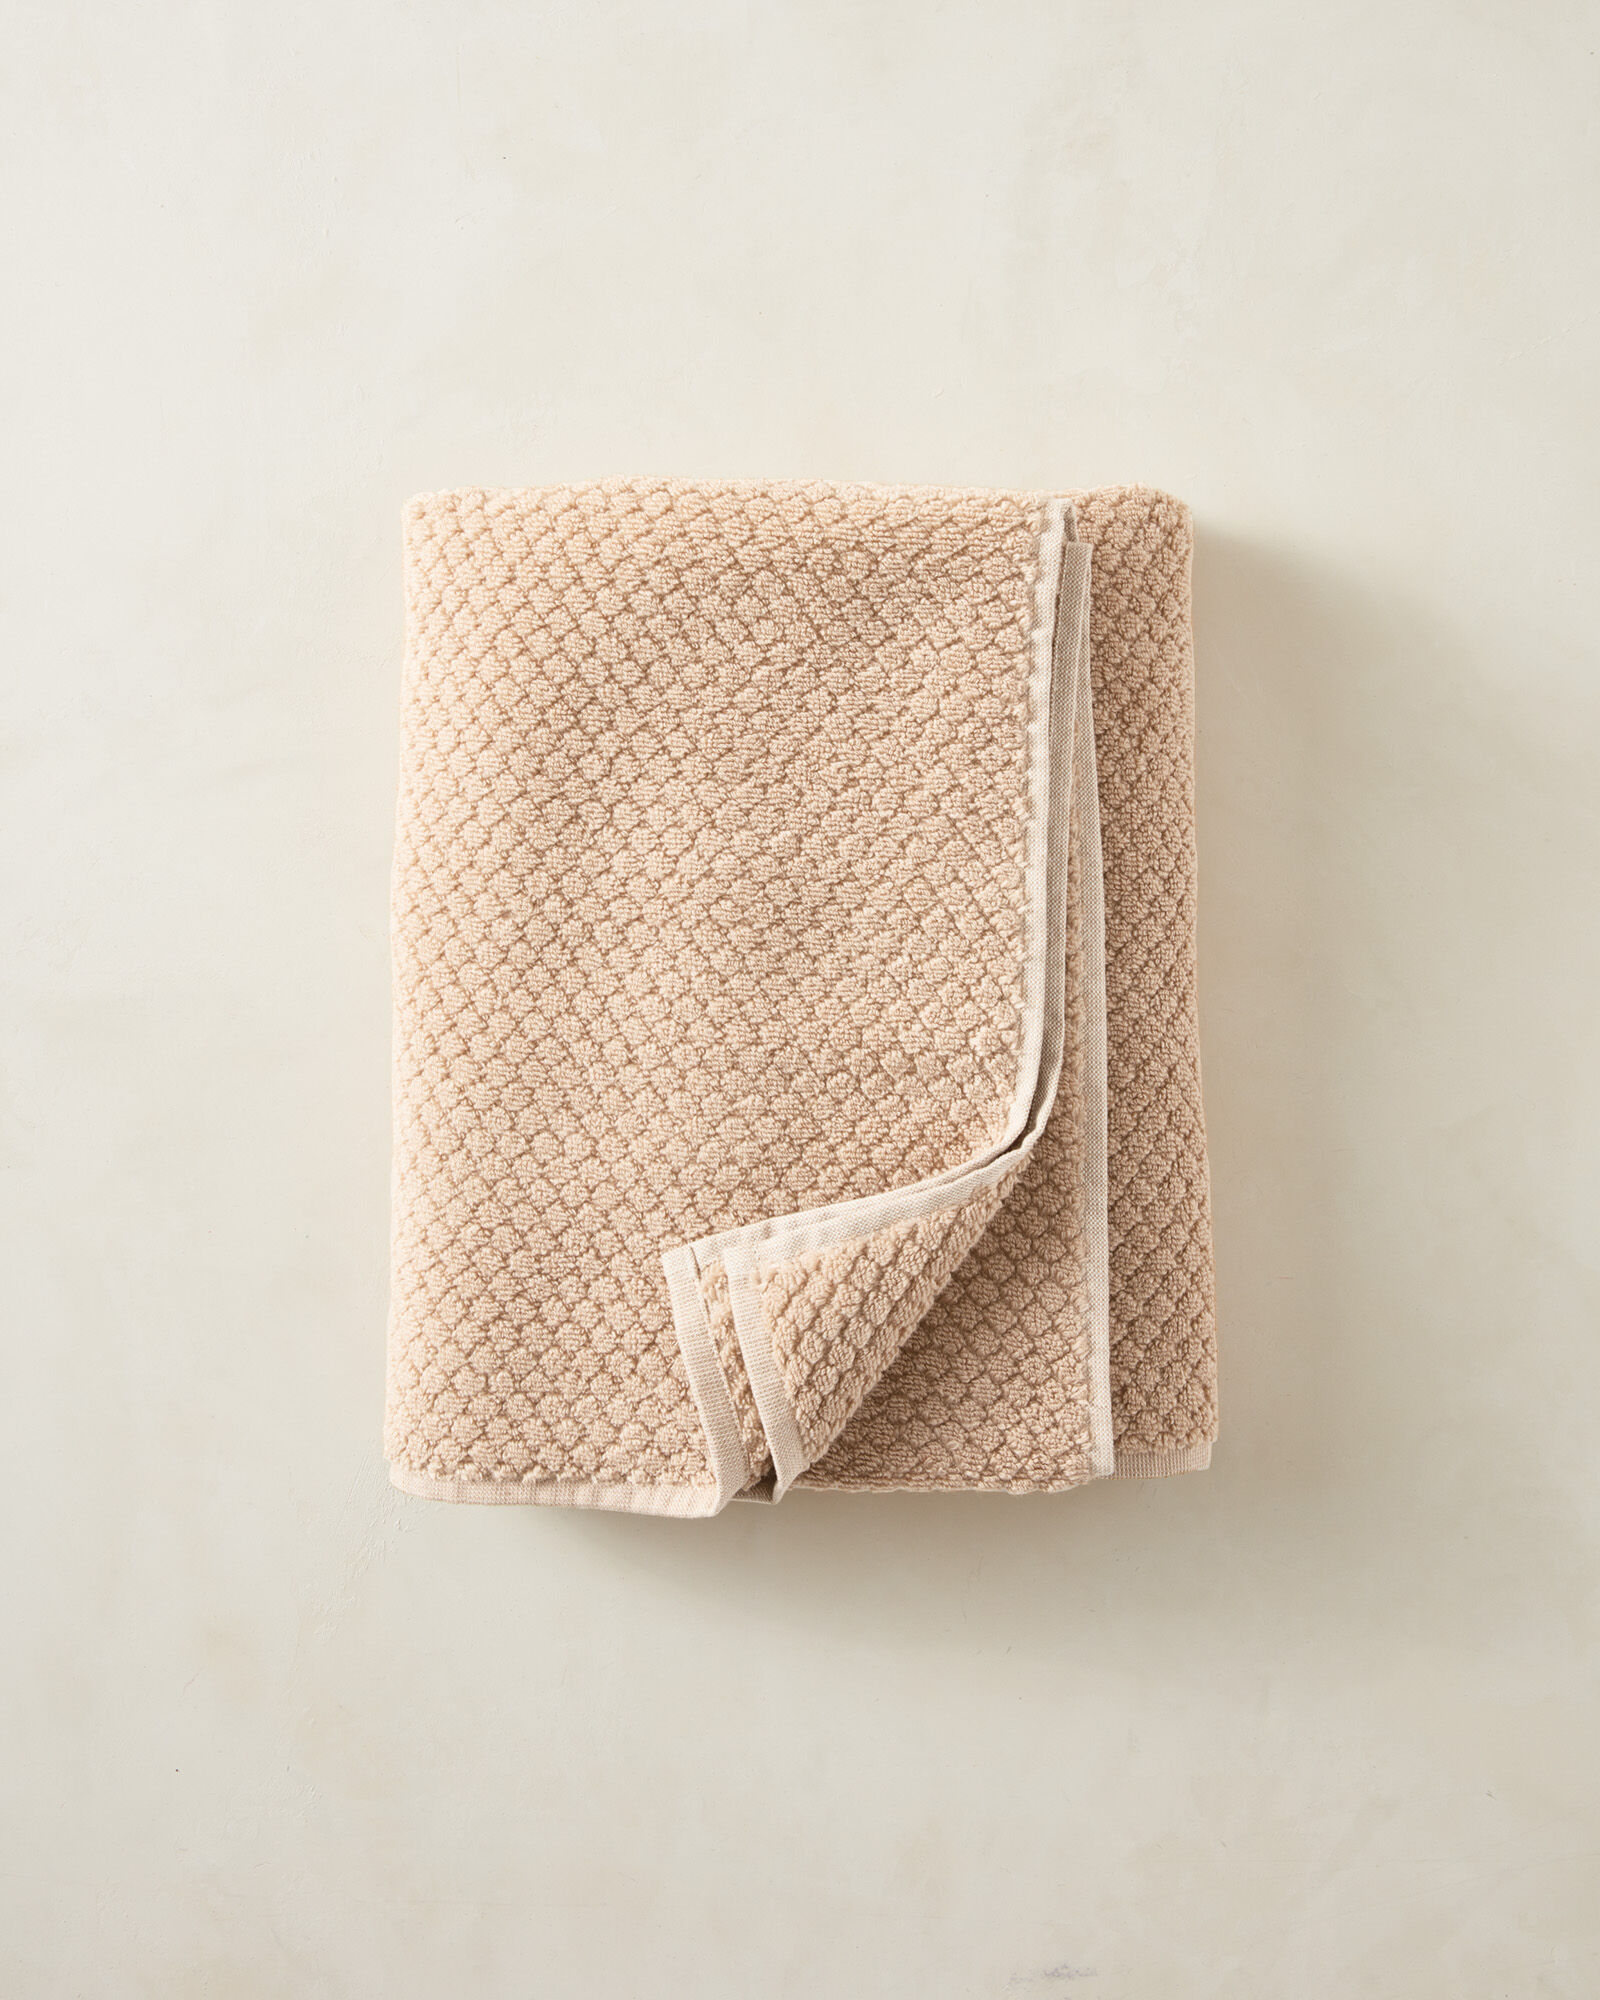 Honeycomb Bath Towels with High quality Cotton